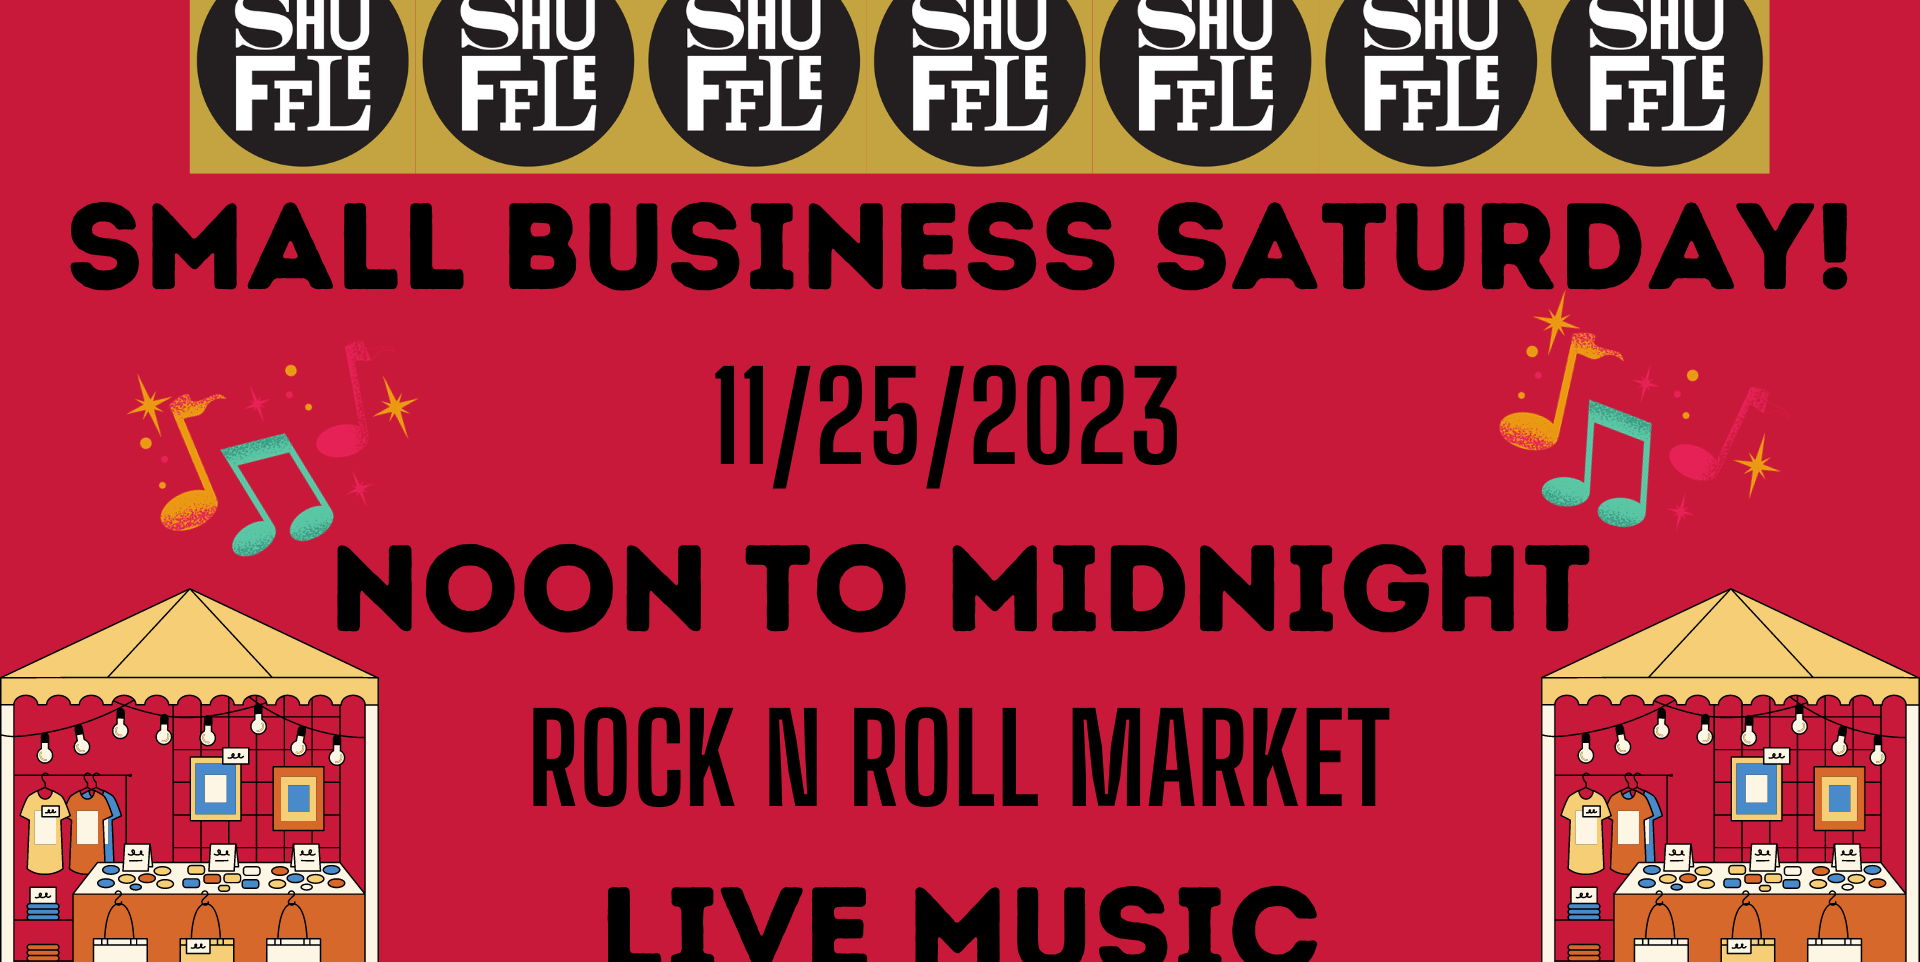 Small Business Saturday Market and Live Music promotional image